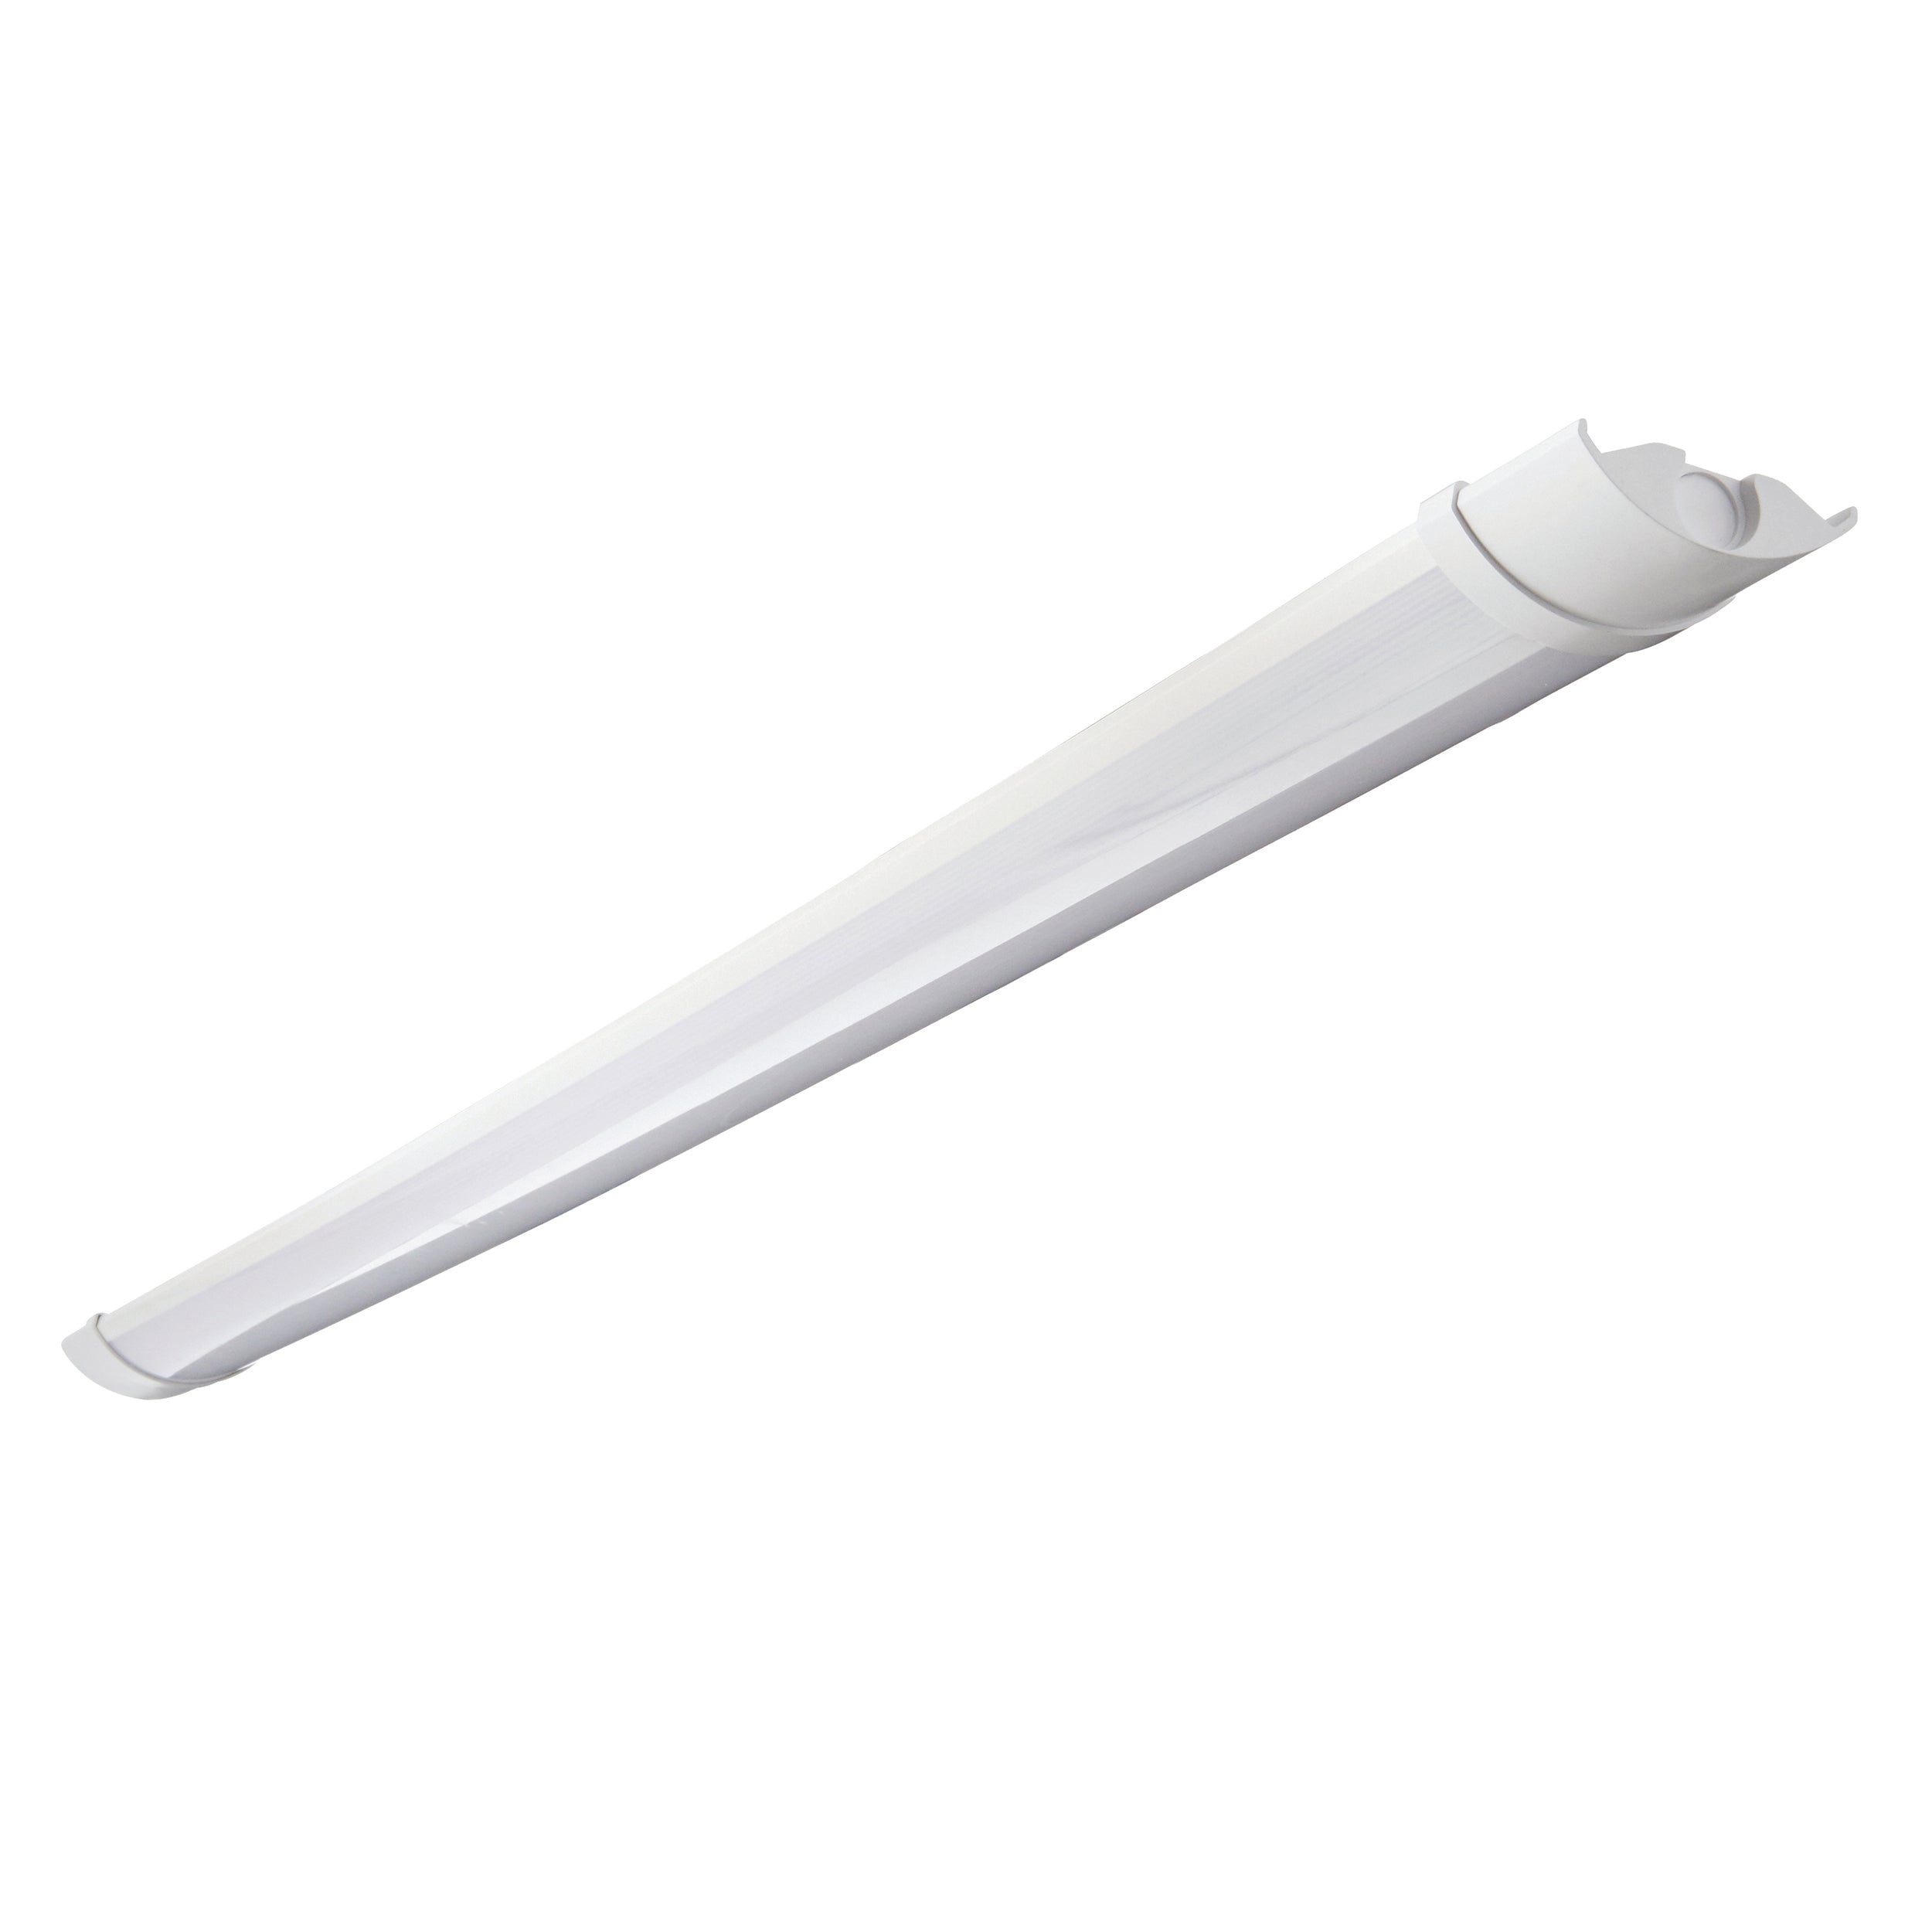 Reeve 2 4ft IP65 33W Daylight White